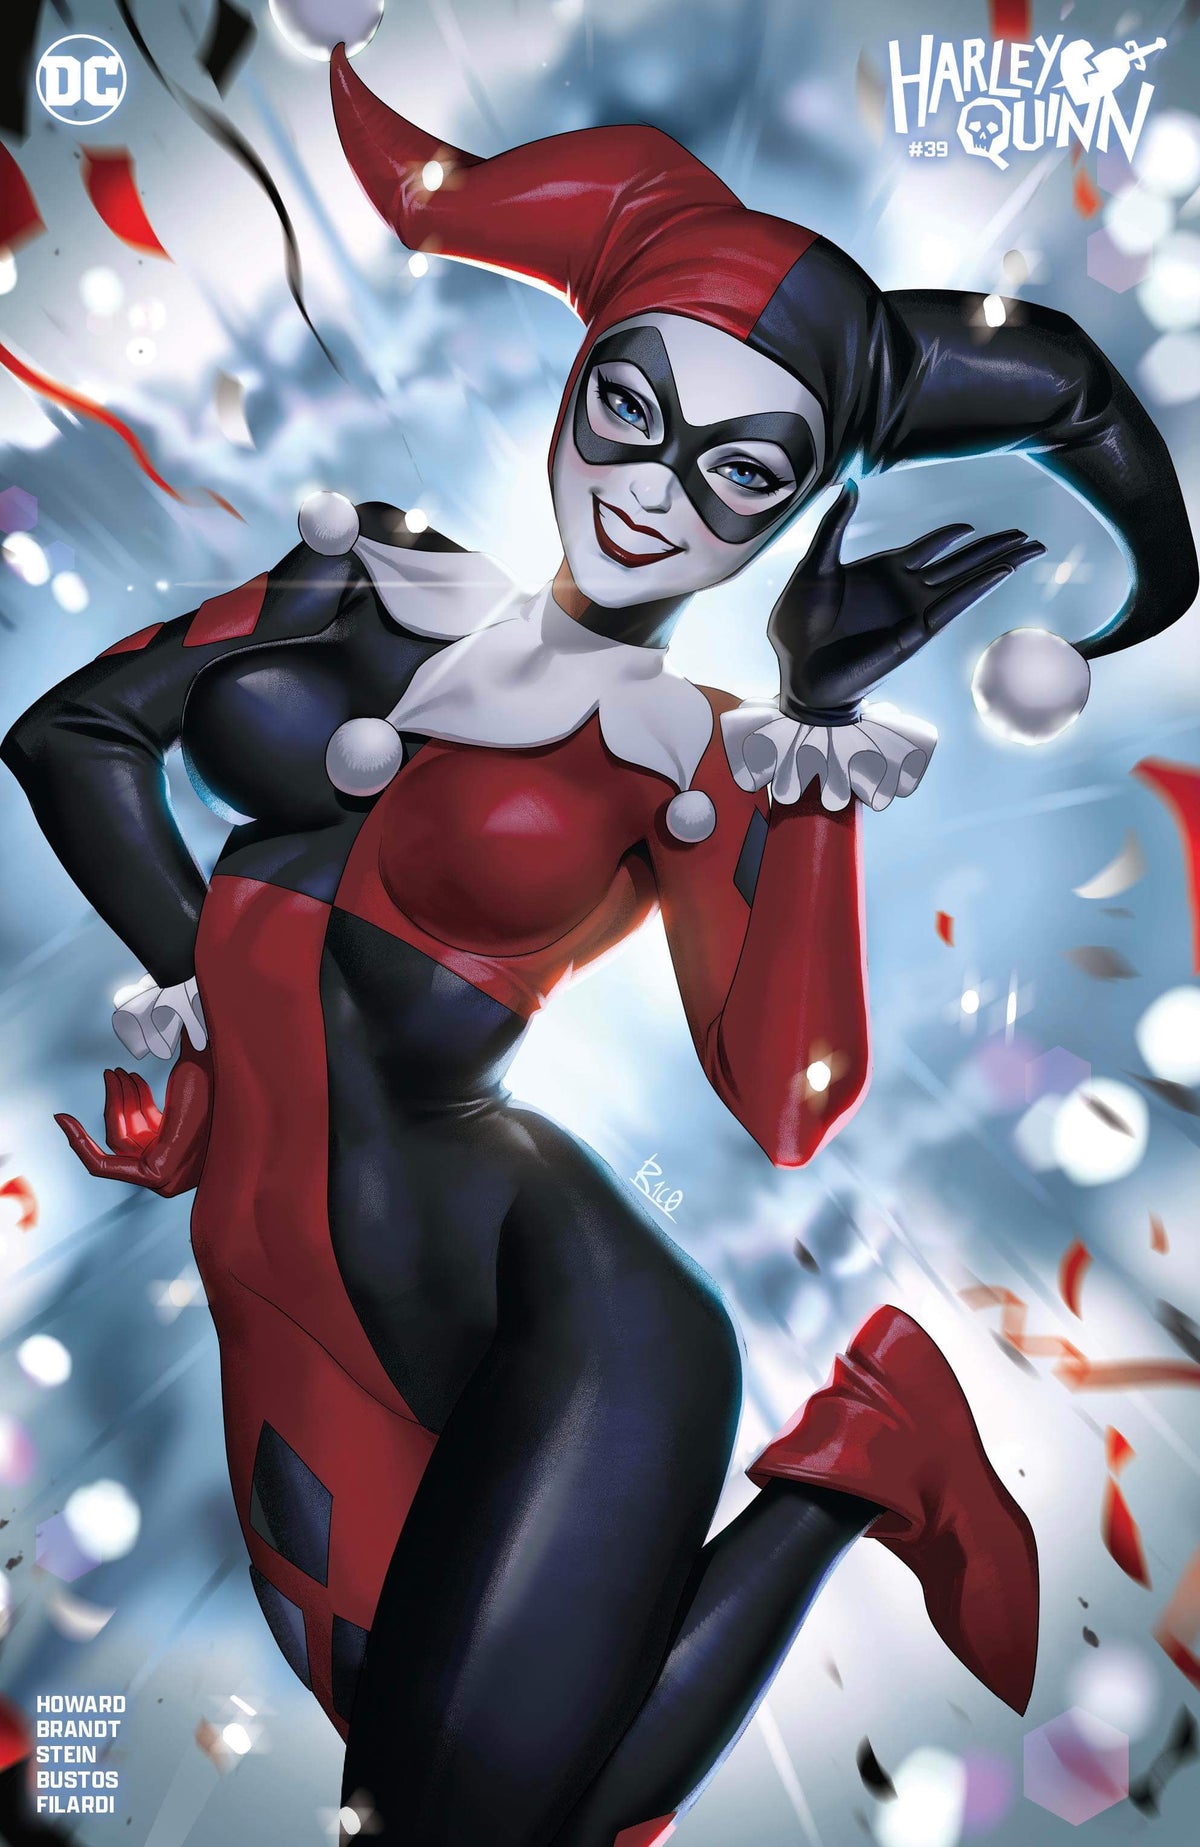 HARLEY QUINN #39 - EXCLUSIVE - R1CO